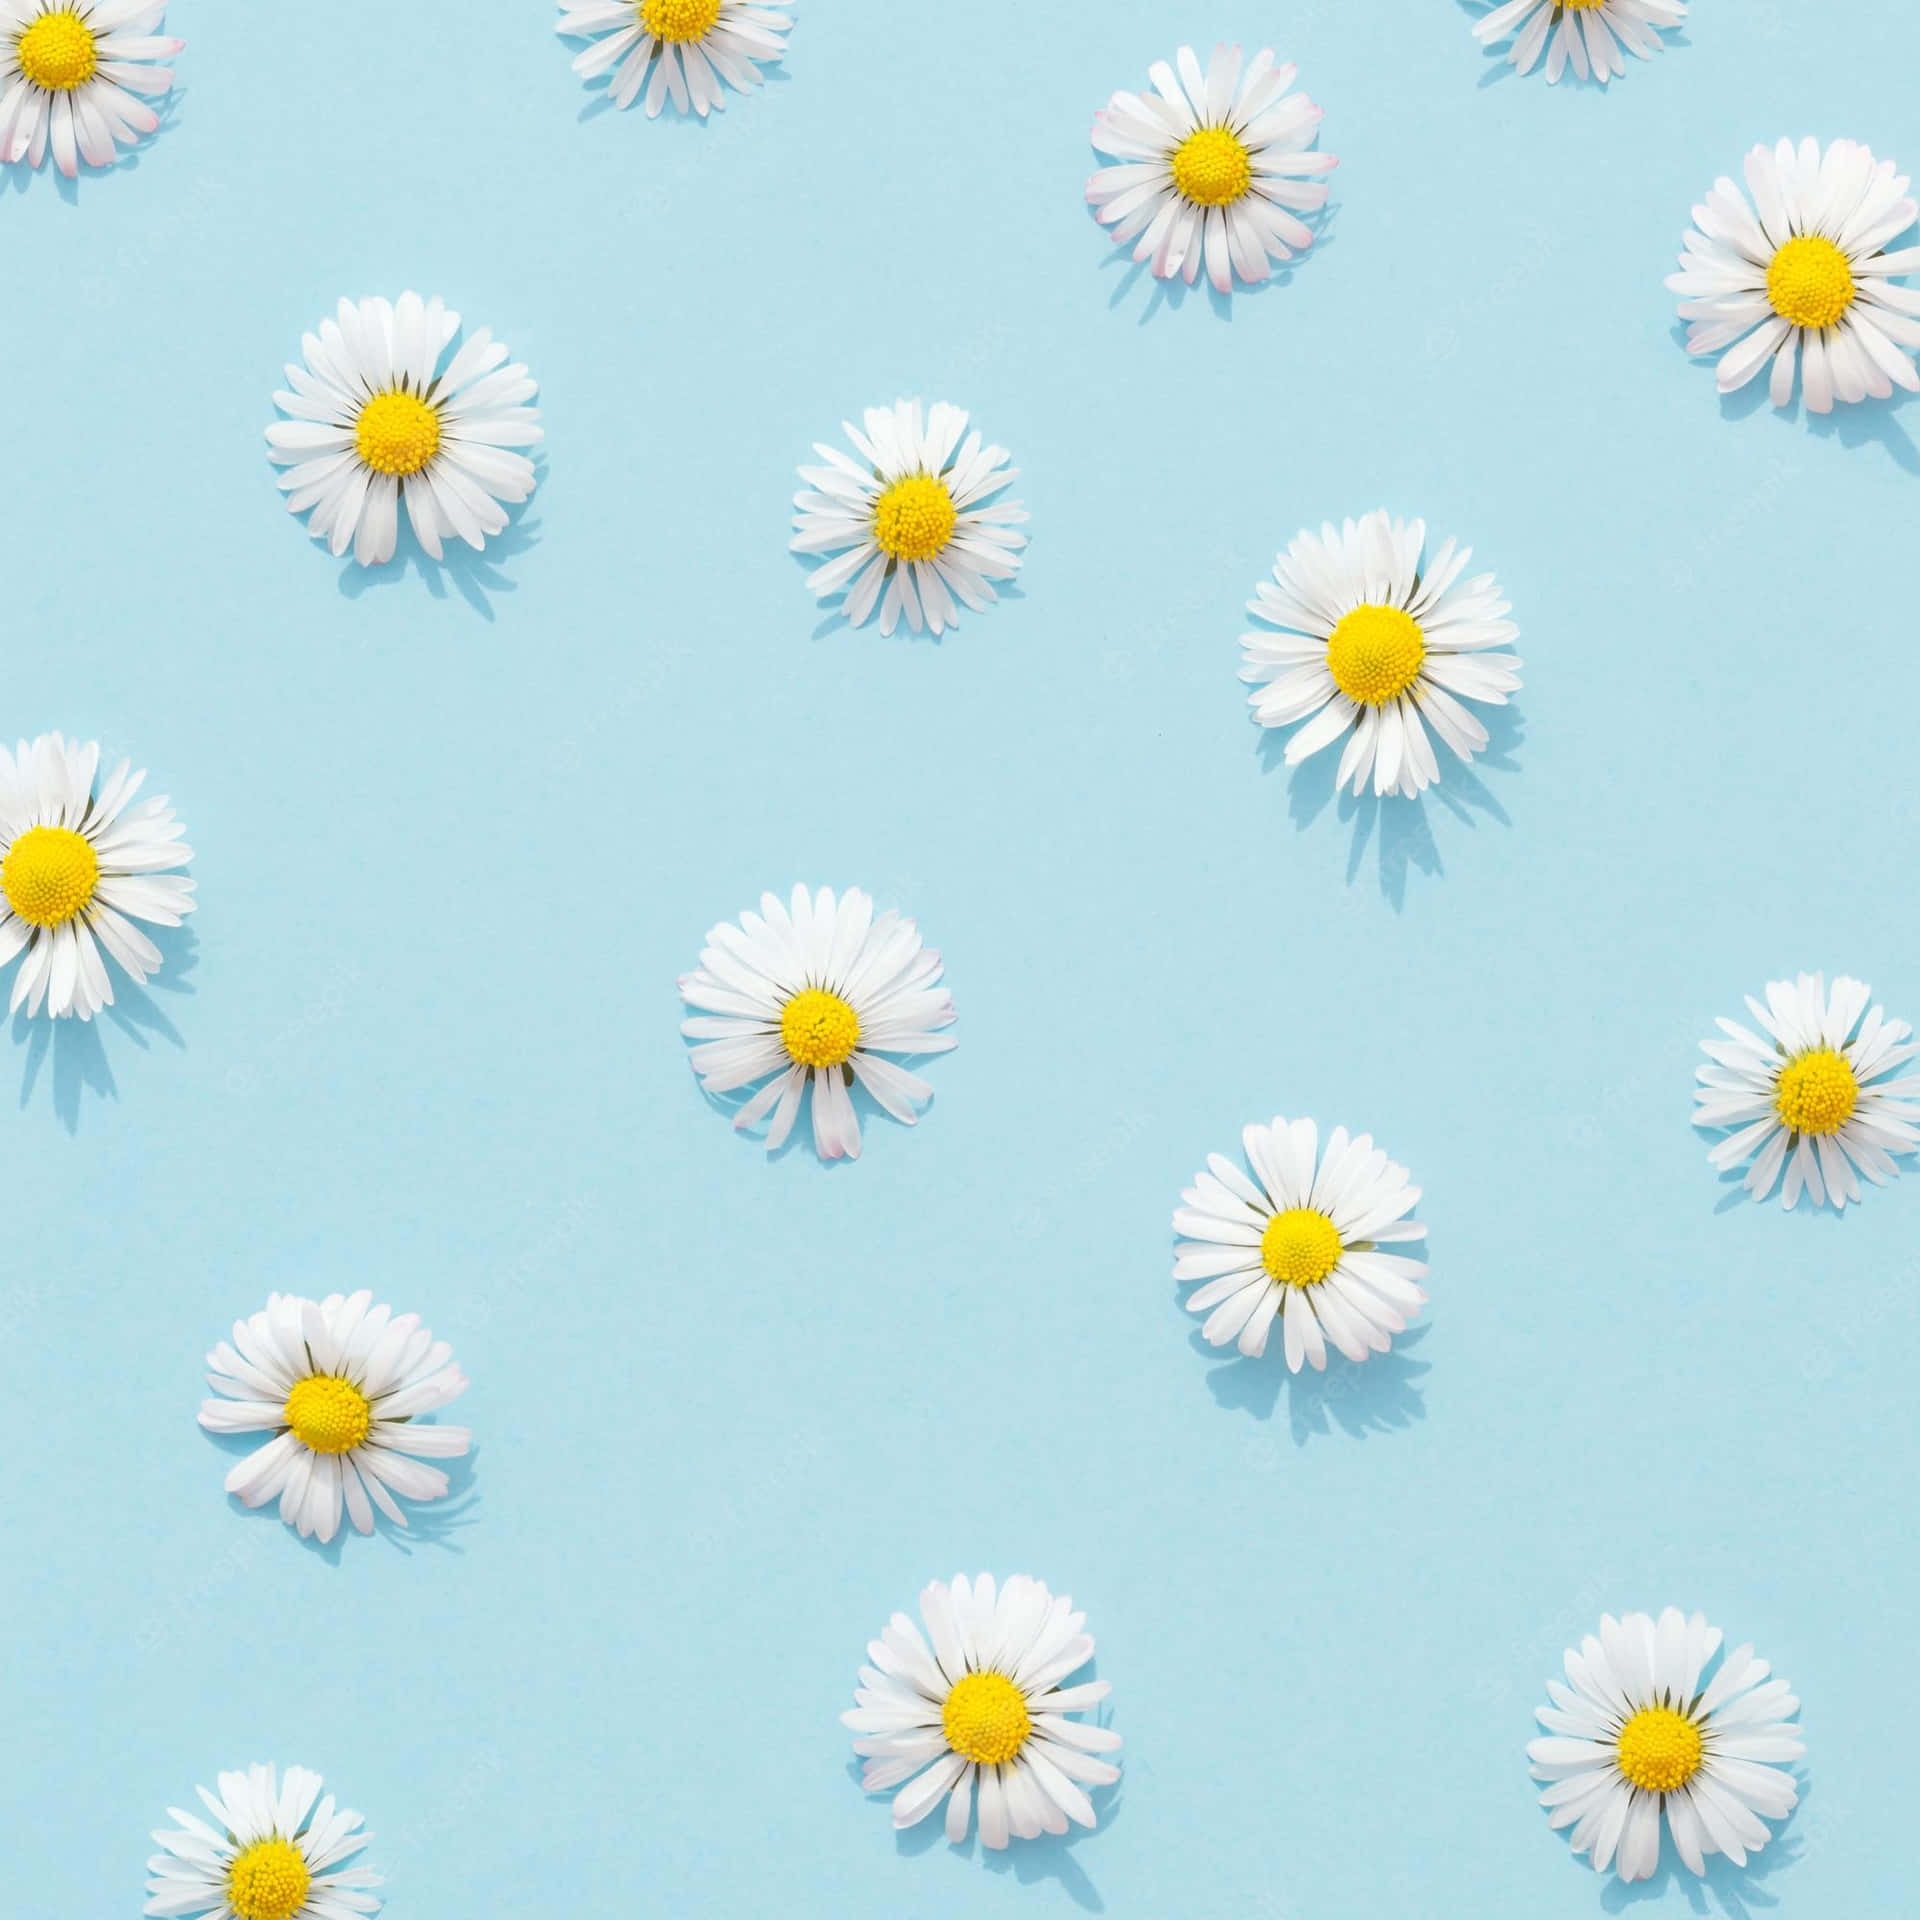 Blue Aesthetic Background With White Daisies